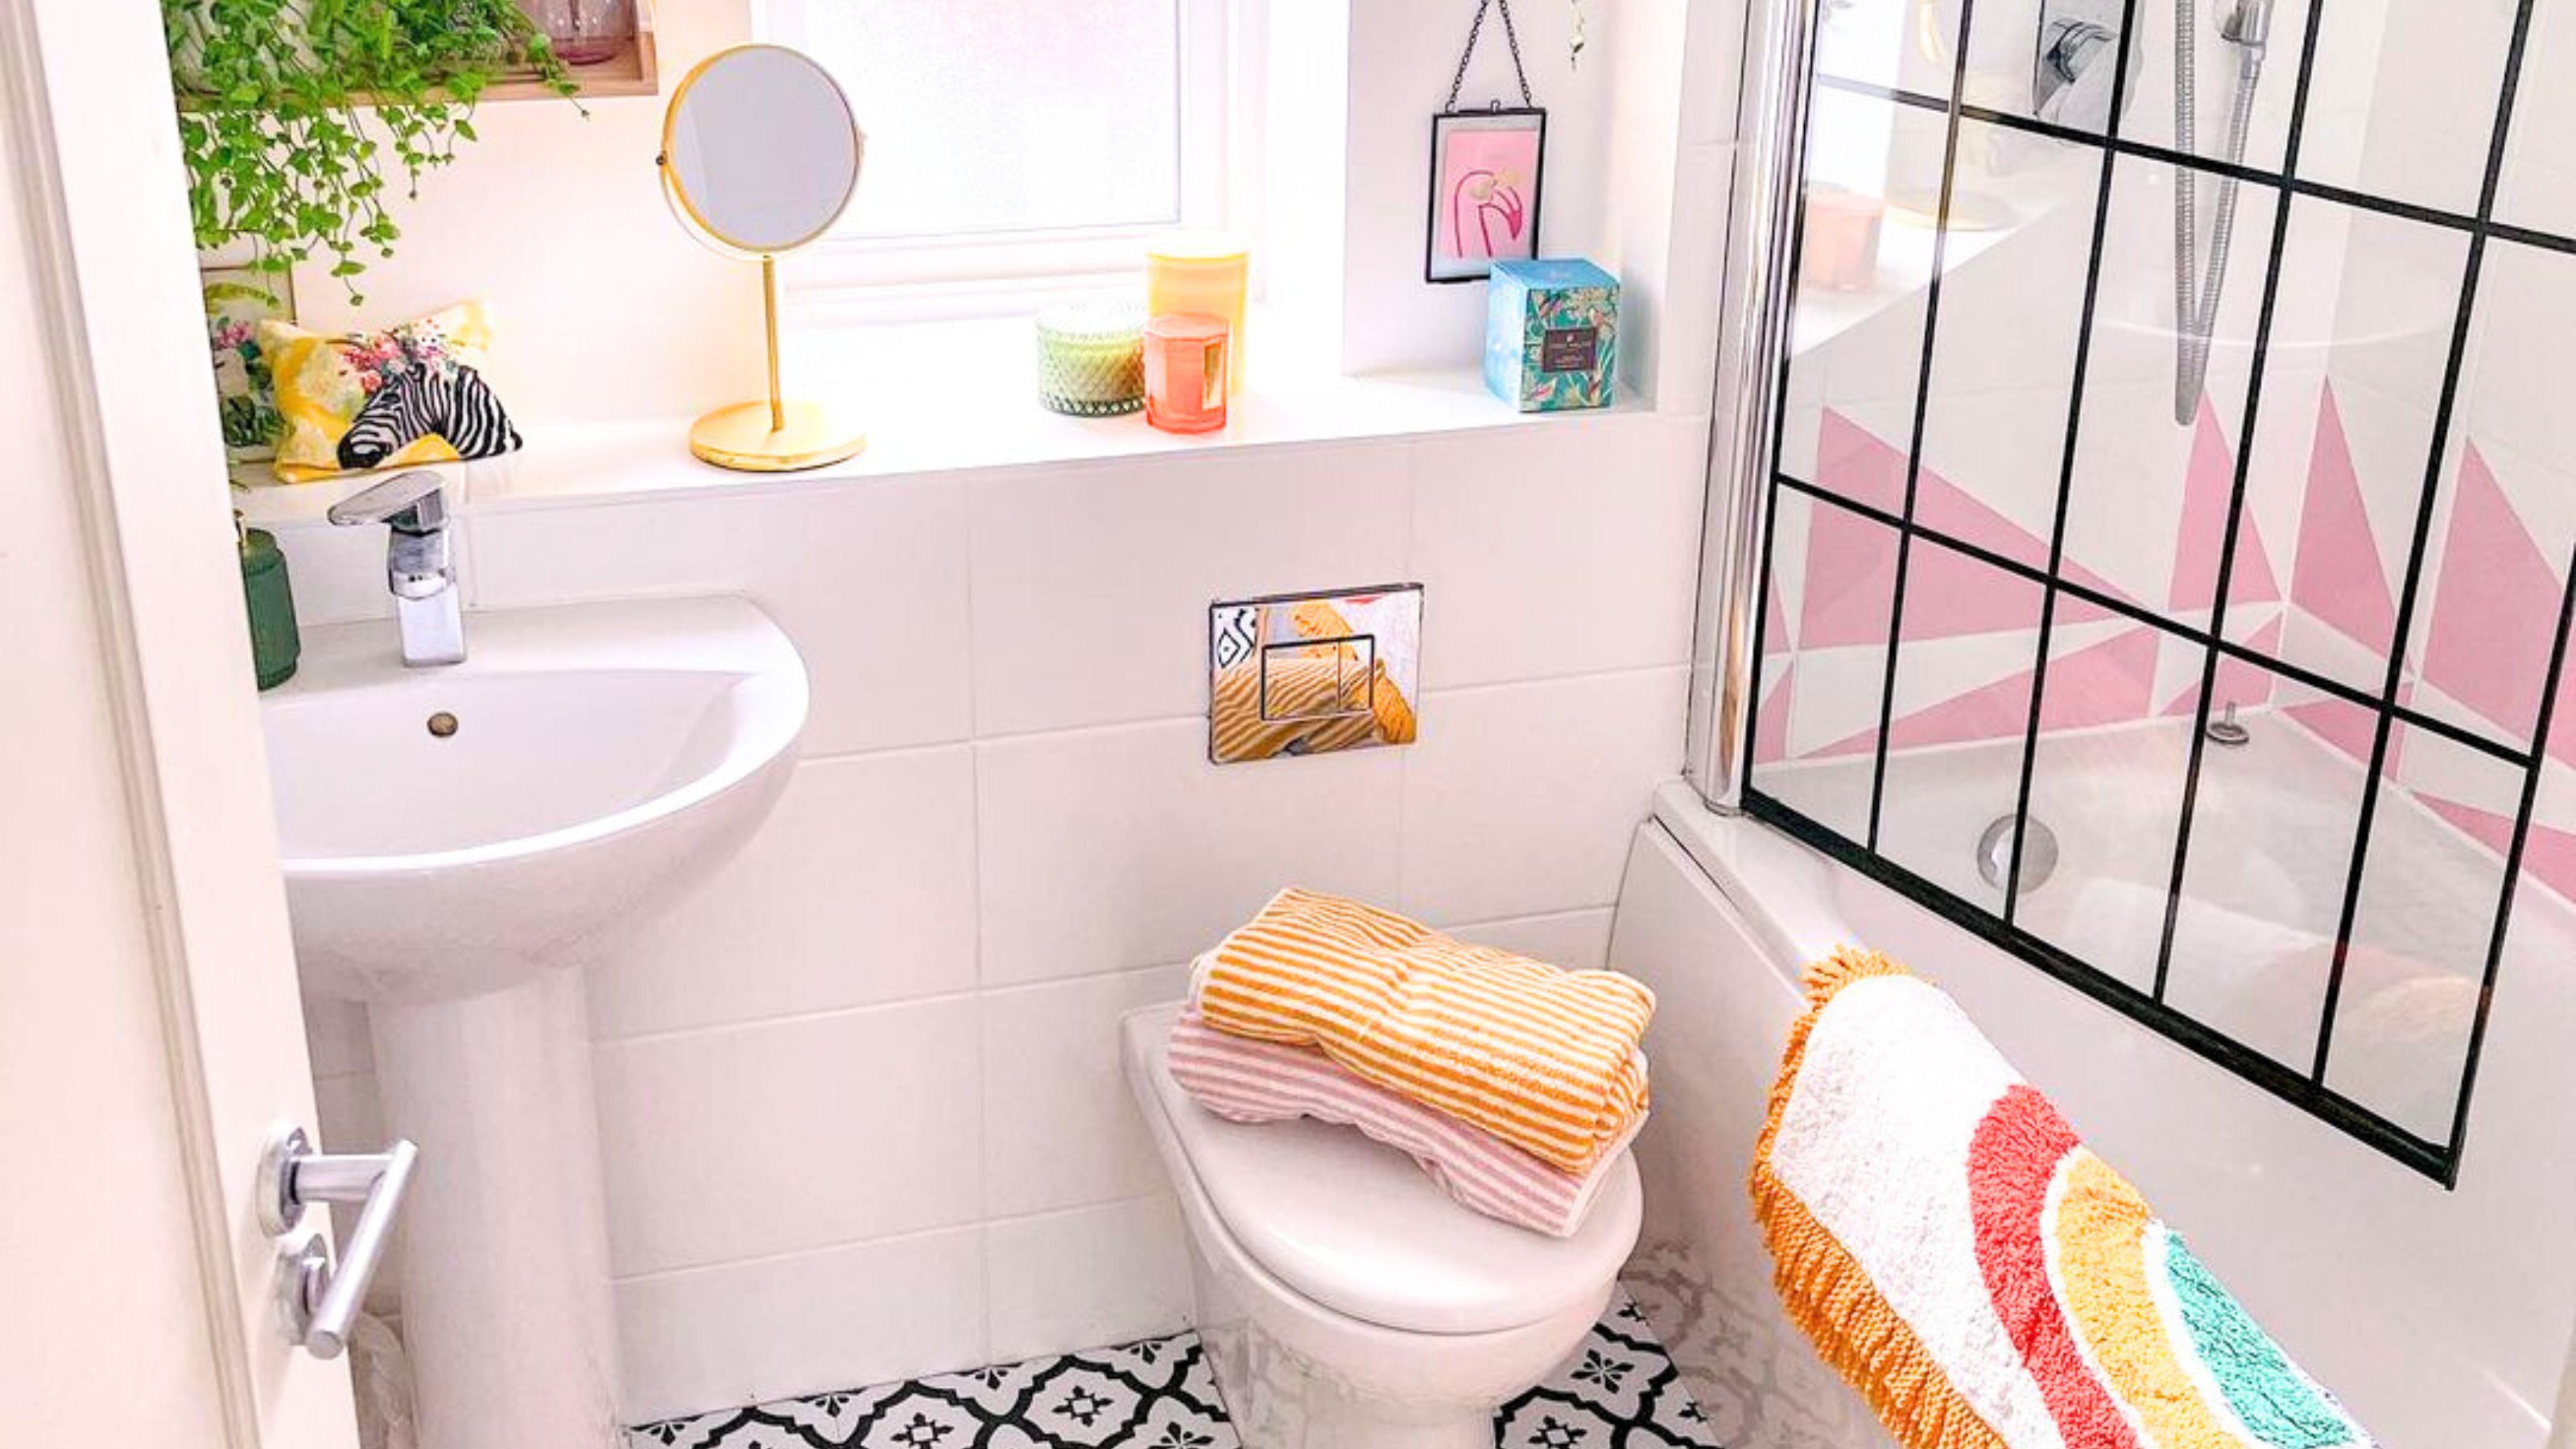 6 Tips to Make Your Bathroom Cozy